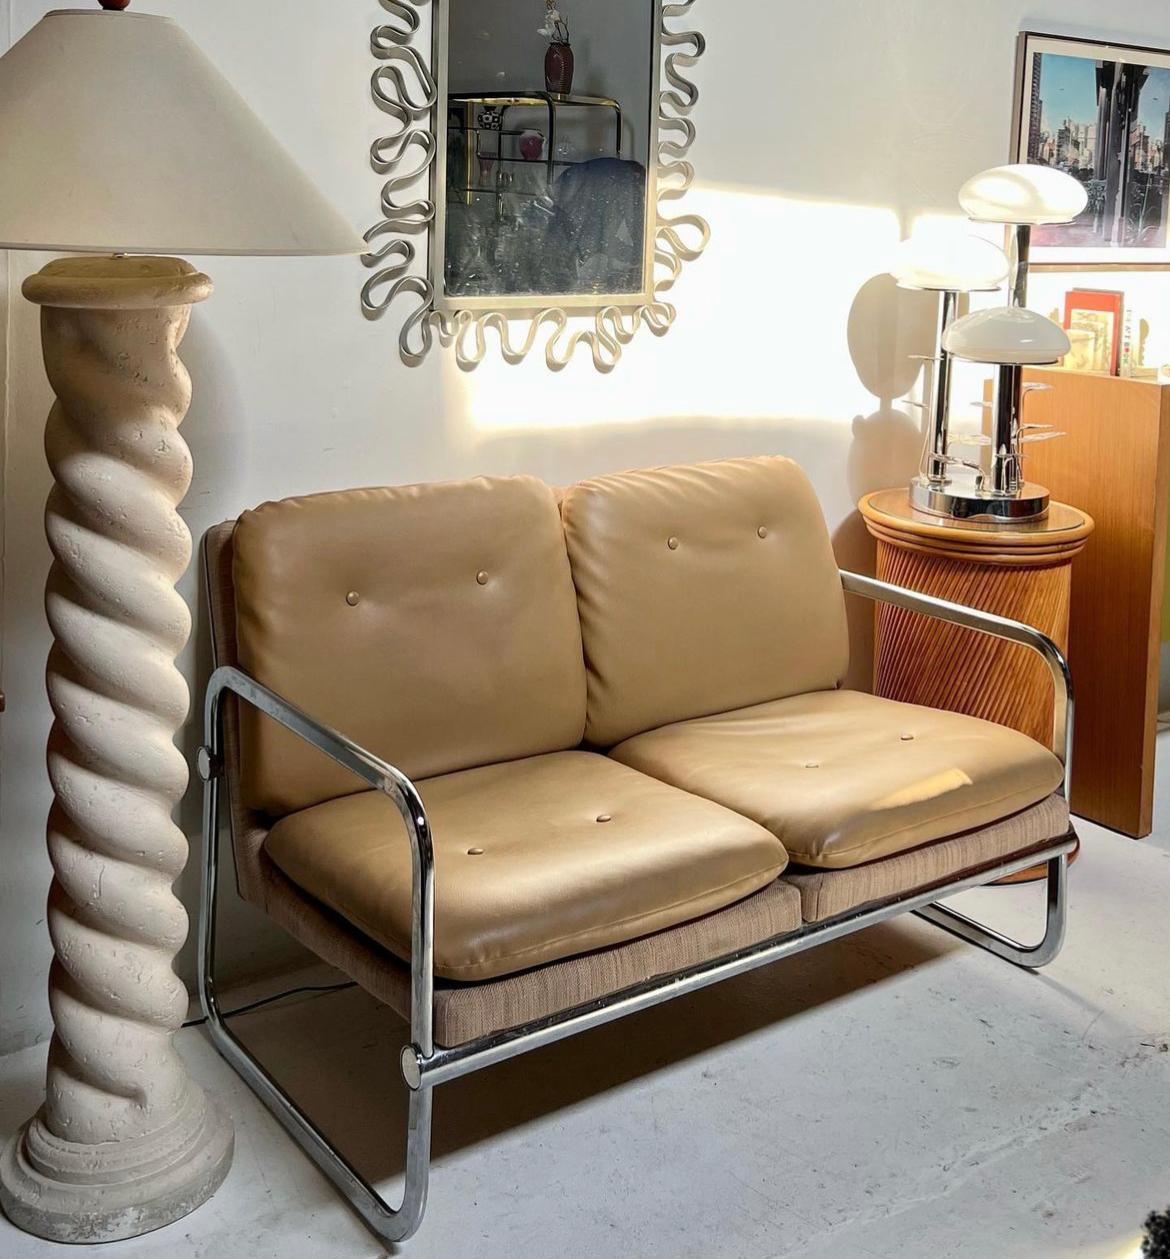 This Mid-Century Modern 2 seater is just as comfortable as it is stylish. The geometric frame is made of chrome plated tubular steel quintessential to the bauhaus design. The seat and backrest are upholstered with beige faux leather and a basket